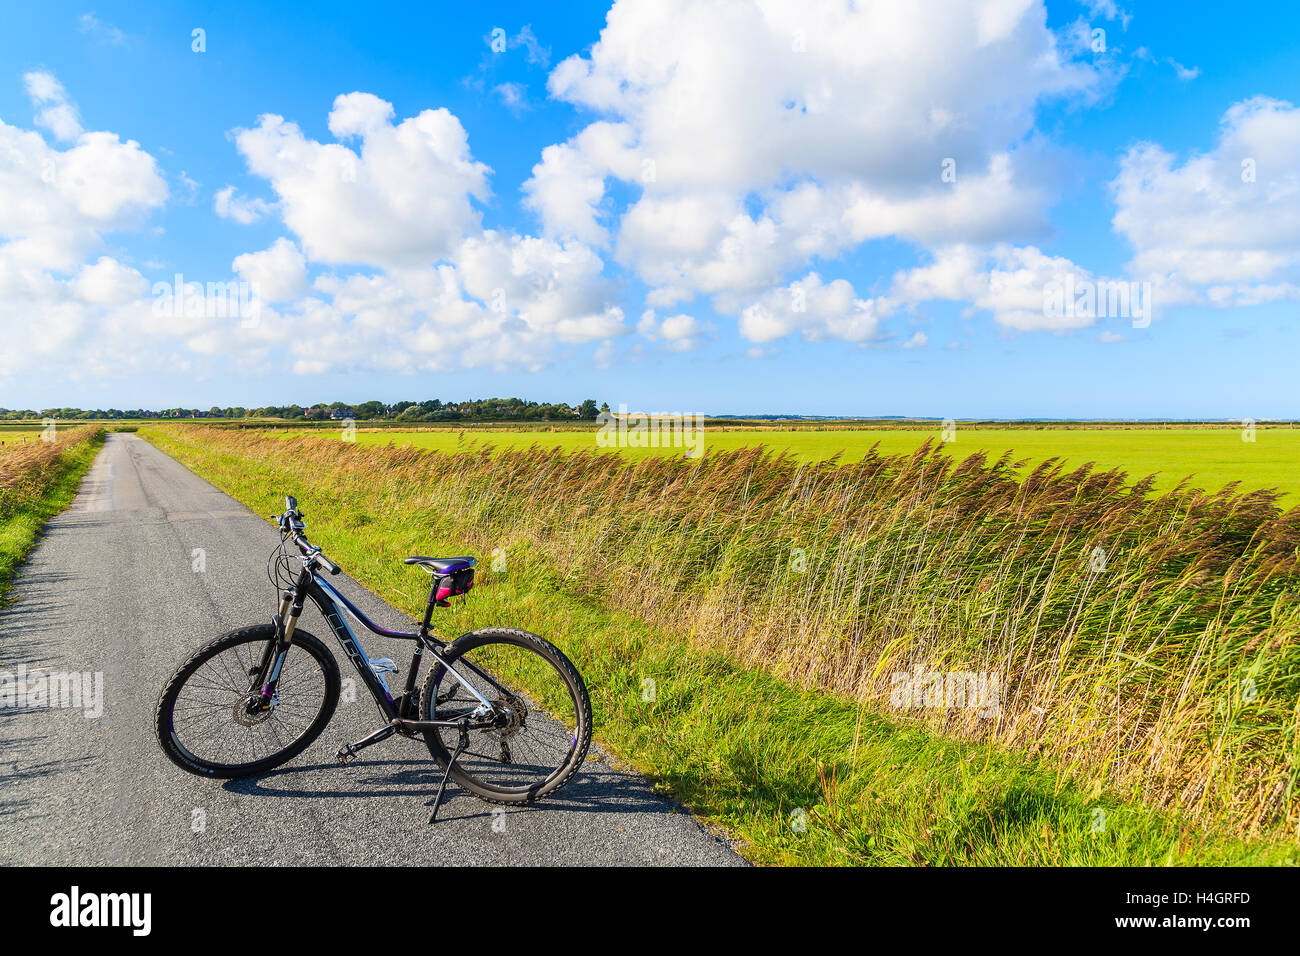 SYLT ISLAND, GERMANY - SEP 9, 2016: bike on road in green countryside landscape of Sylt island near Keitum village, Germany. Stock Photo